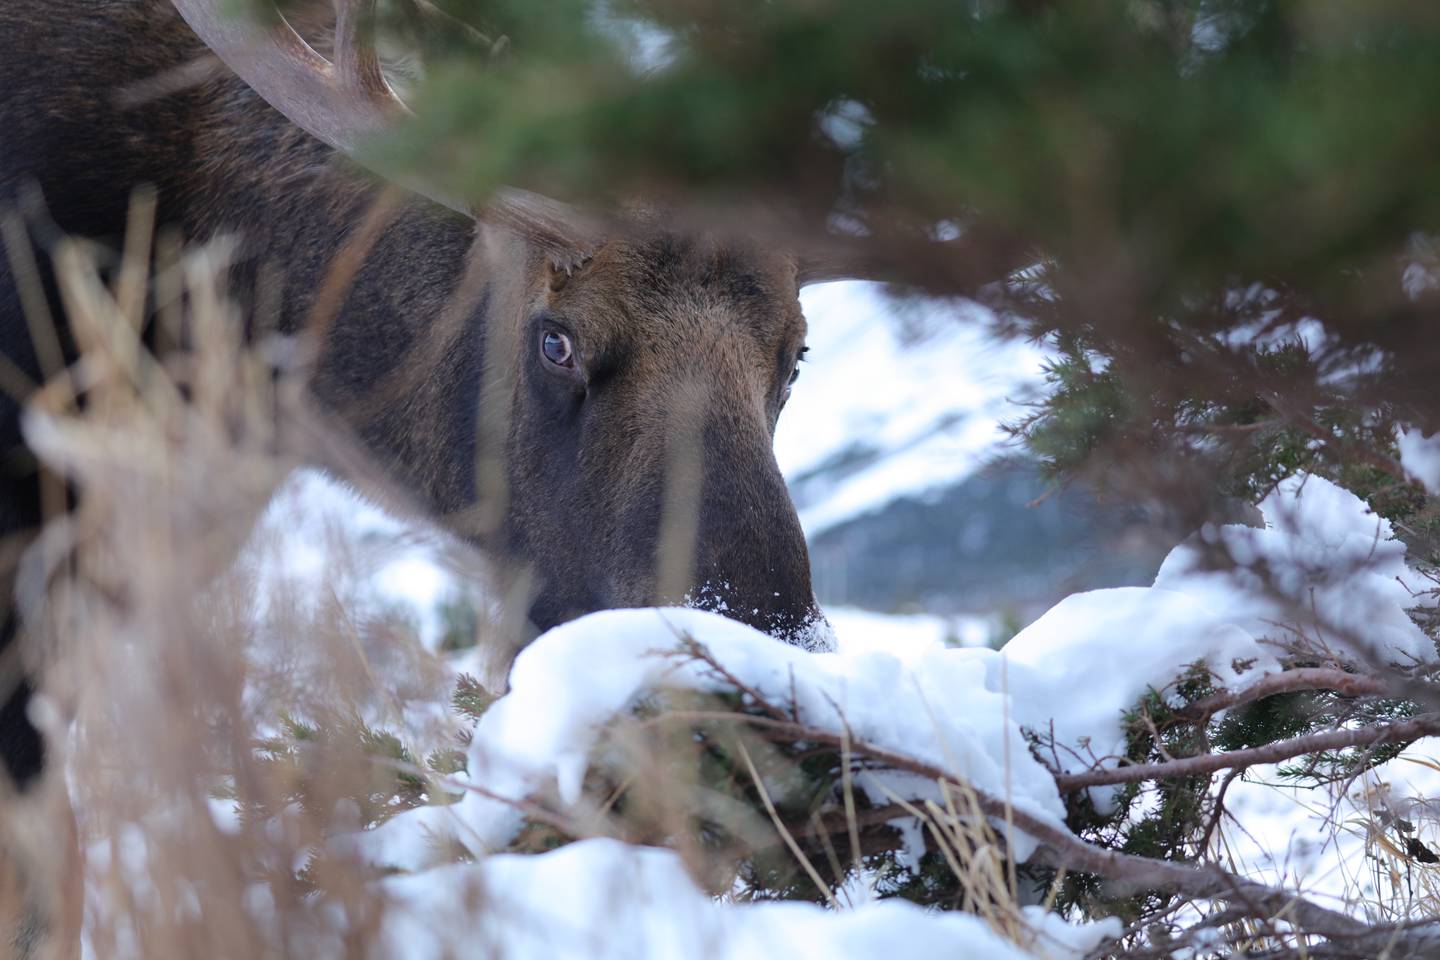 A moose giving a steely look